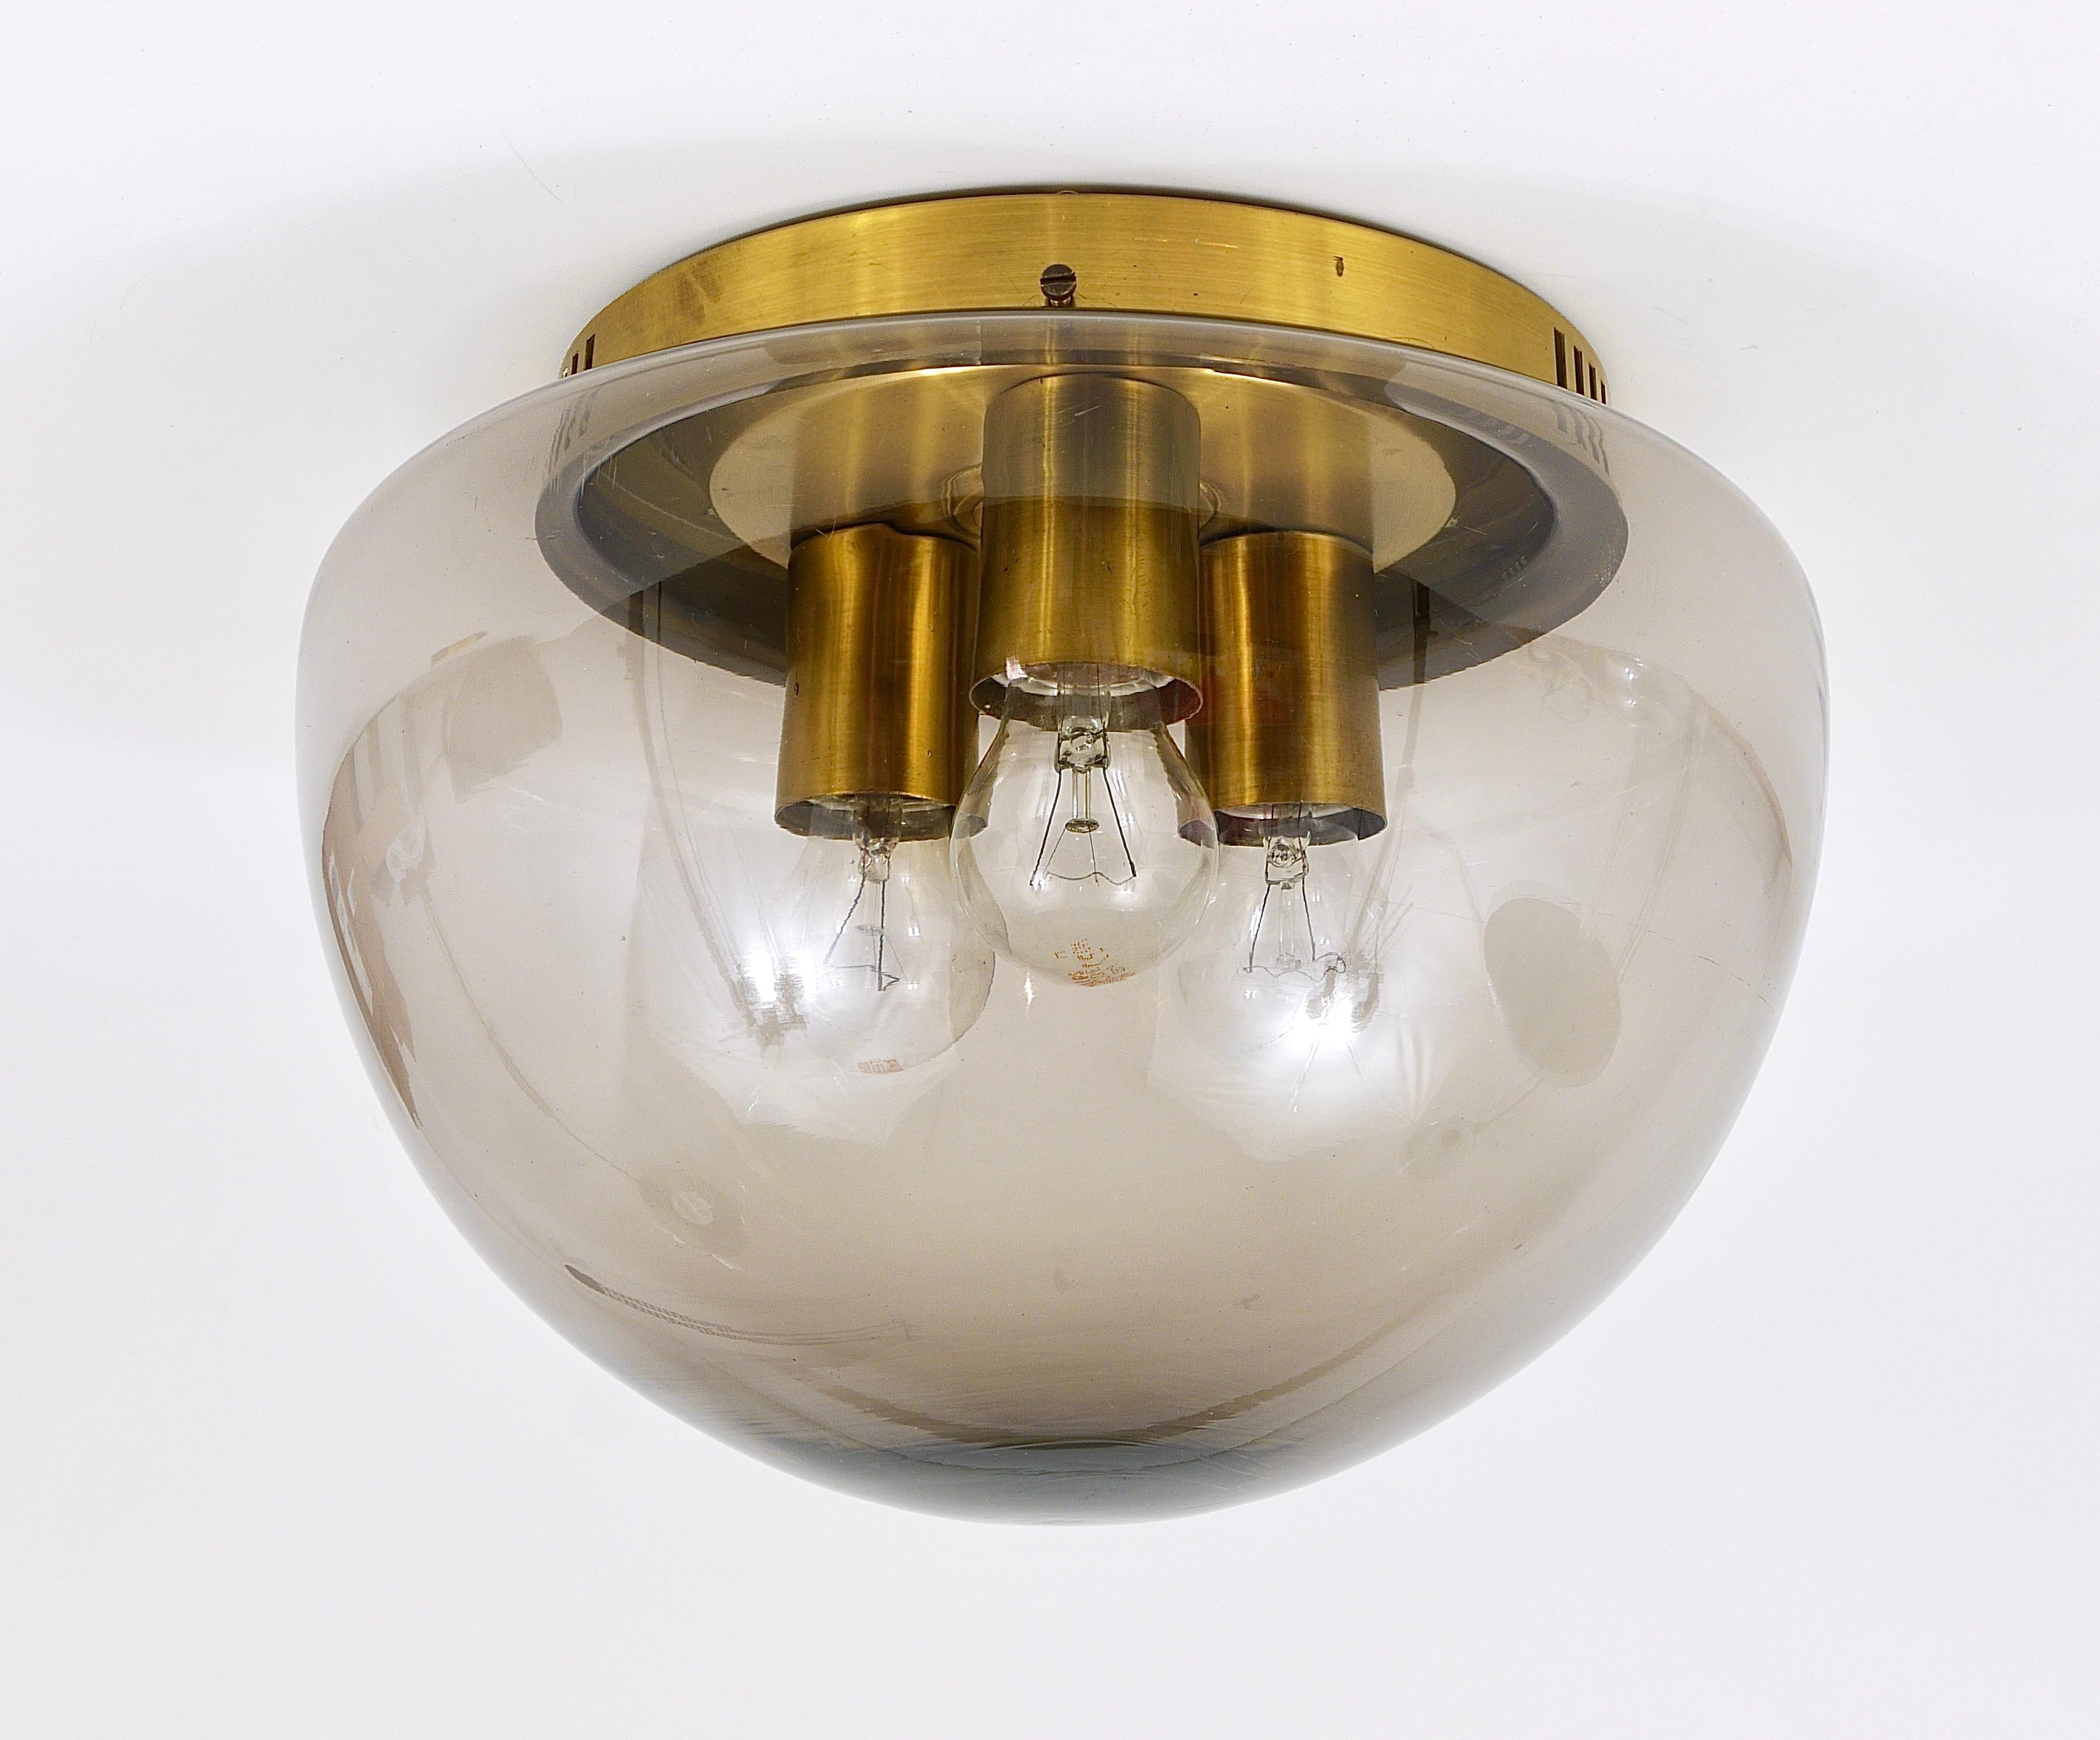 A beautiful brass flushmount from the 1970s. With a globe lampshade, made of smoked grey glass. Executed by Peill & Putzler / Germany in the 1970s. Has three light sources and is in good condition with marginal wear.